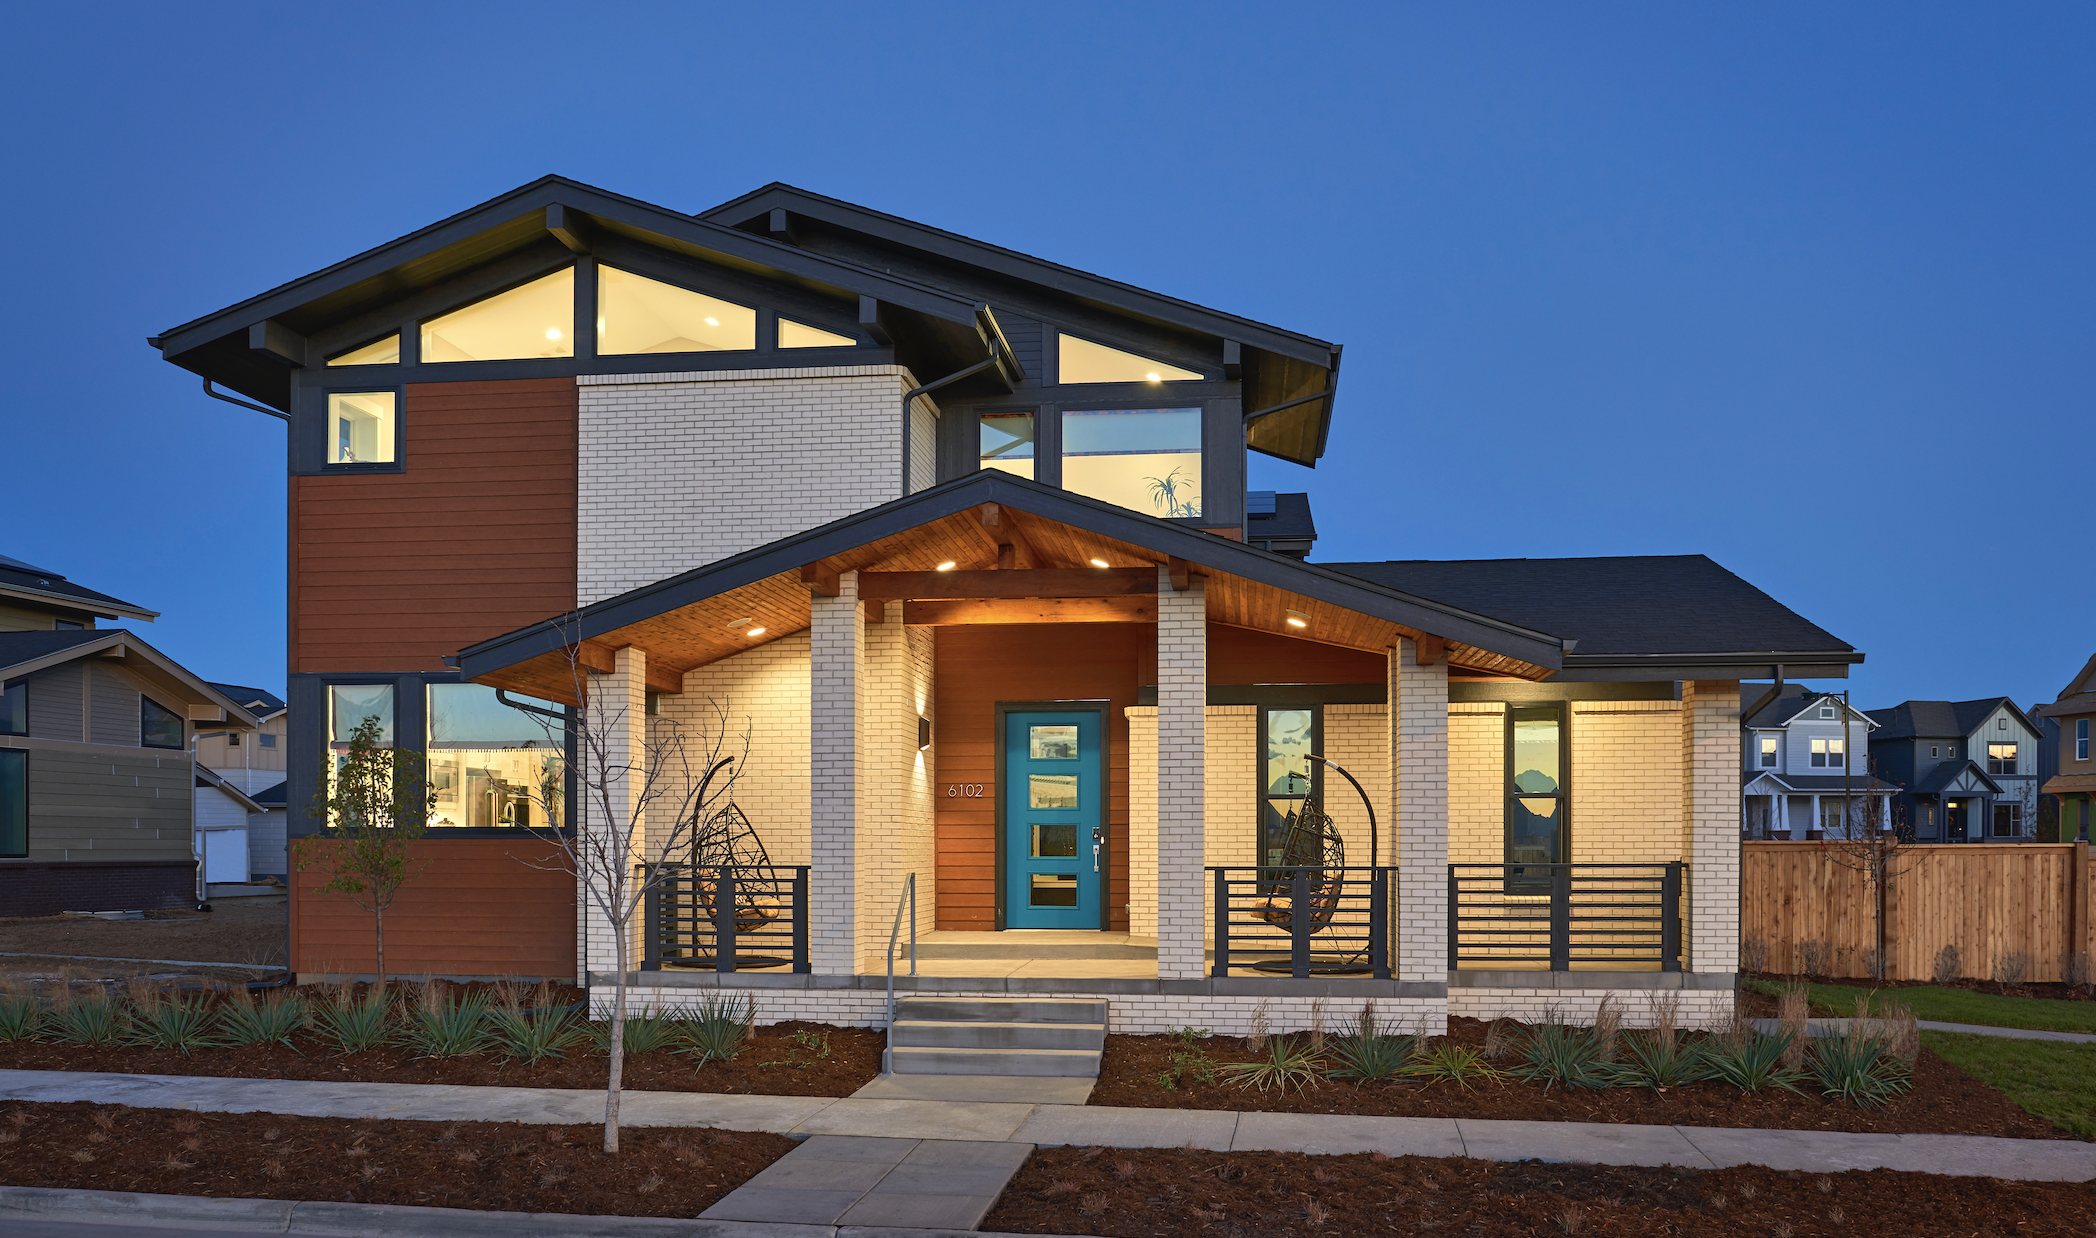 2020 National Housing Quality silver award winner Thrive house exterior